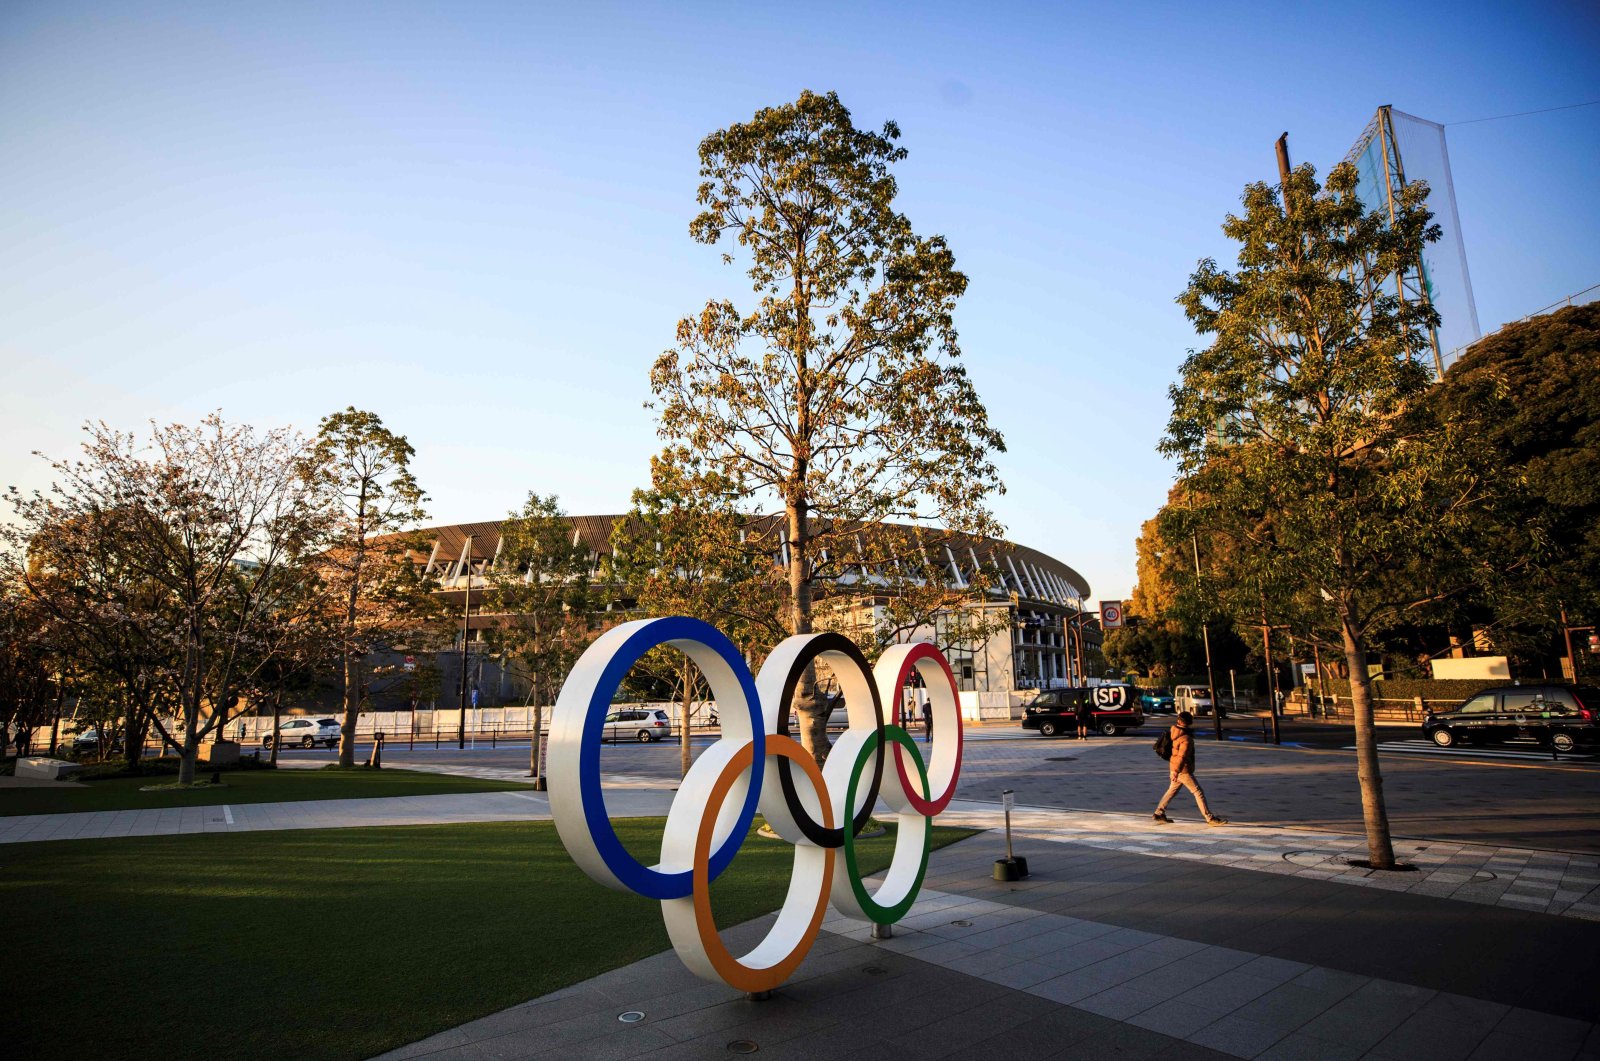 A man walks past the Olympic rings in front of the Japan National Stadium, the main venue for the Tokyo 2020 Olympic Games, in Tokyo, Japan, Wednesday, March 25, 2020. (AFP Photo)